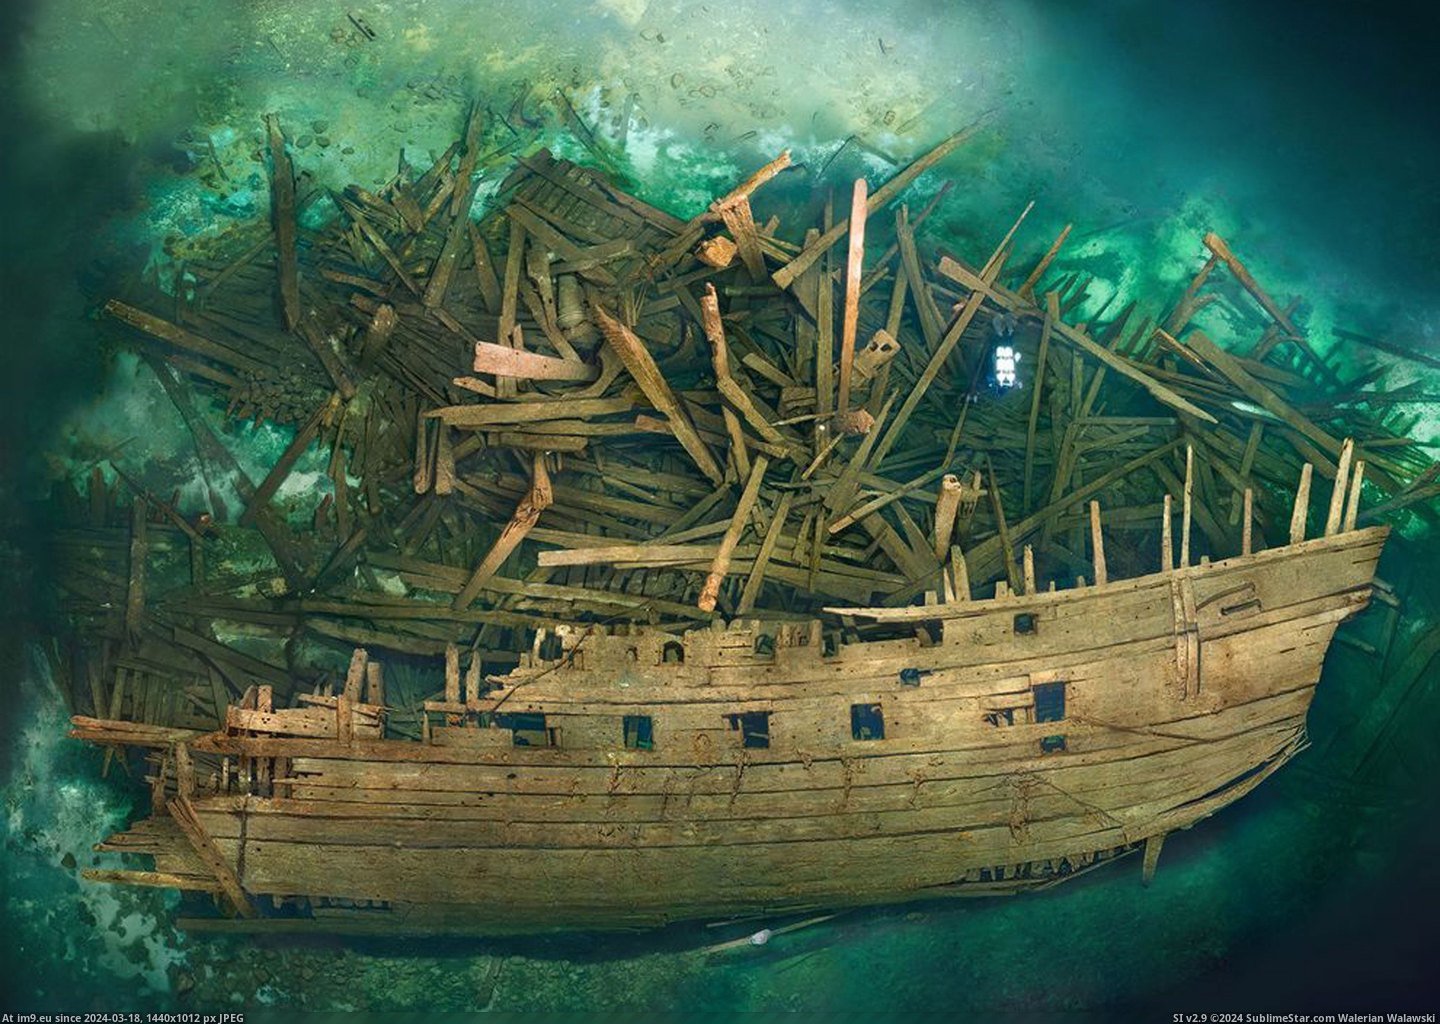 #Years #Pretty #Battle #Exploded #Wreck #Preserved #Warship #Land #Mars #Swedish [Pics] Wreck of the Swedish warship Mars, which exploded during the first battle of Öland. Pretty well preserved for 500 years u Pic. (Bild von album My r/PICS favs))